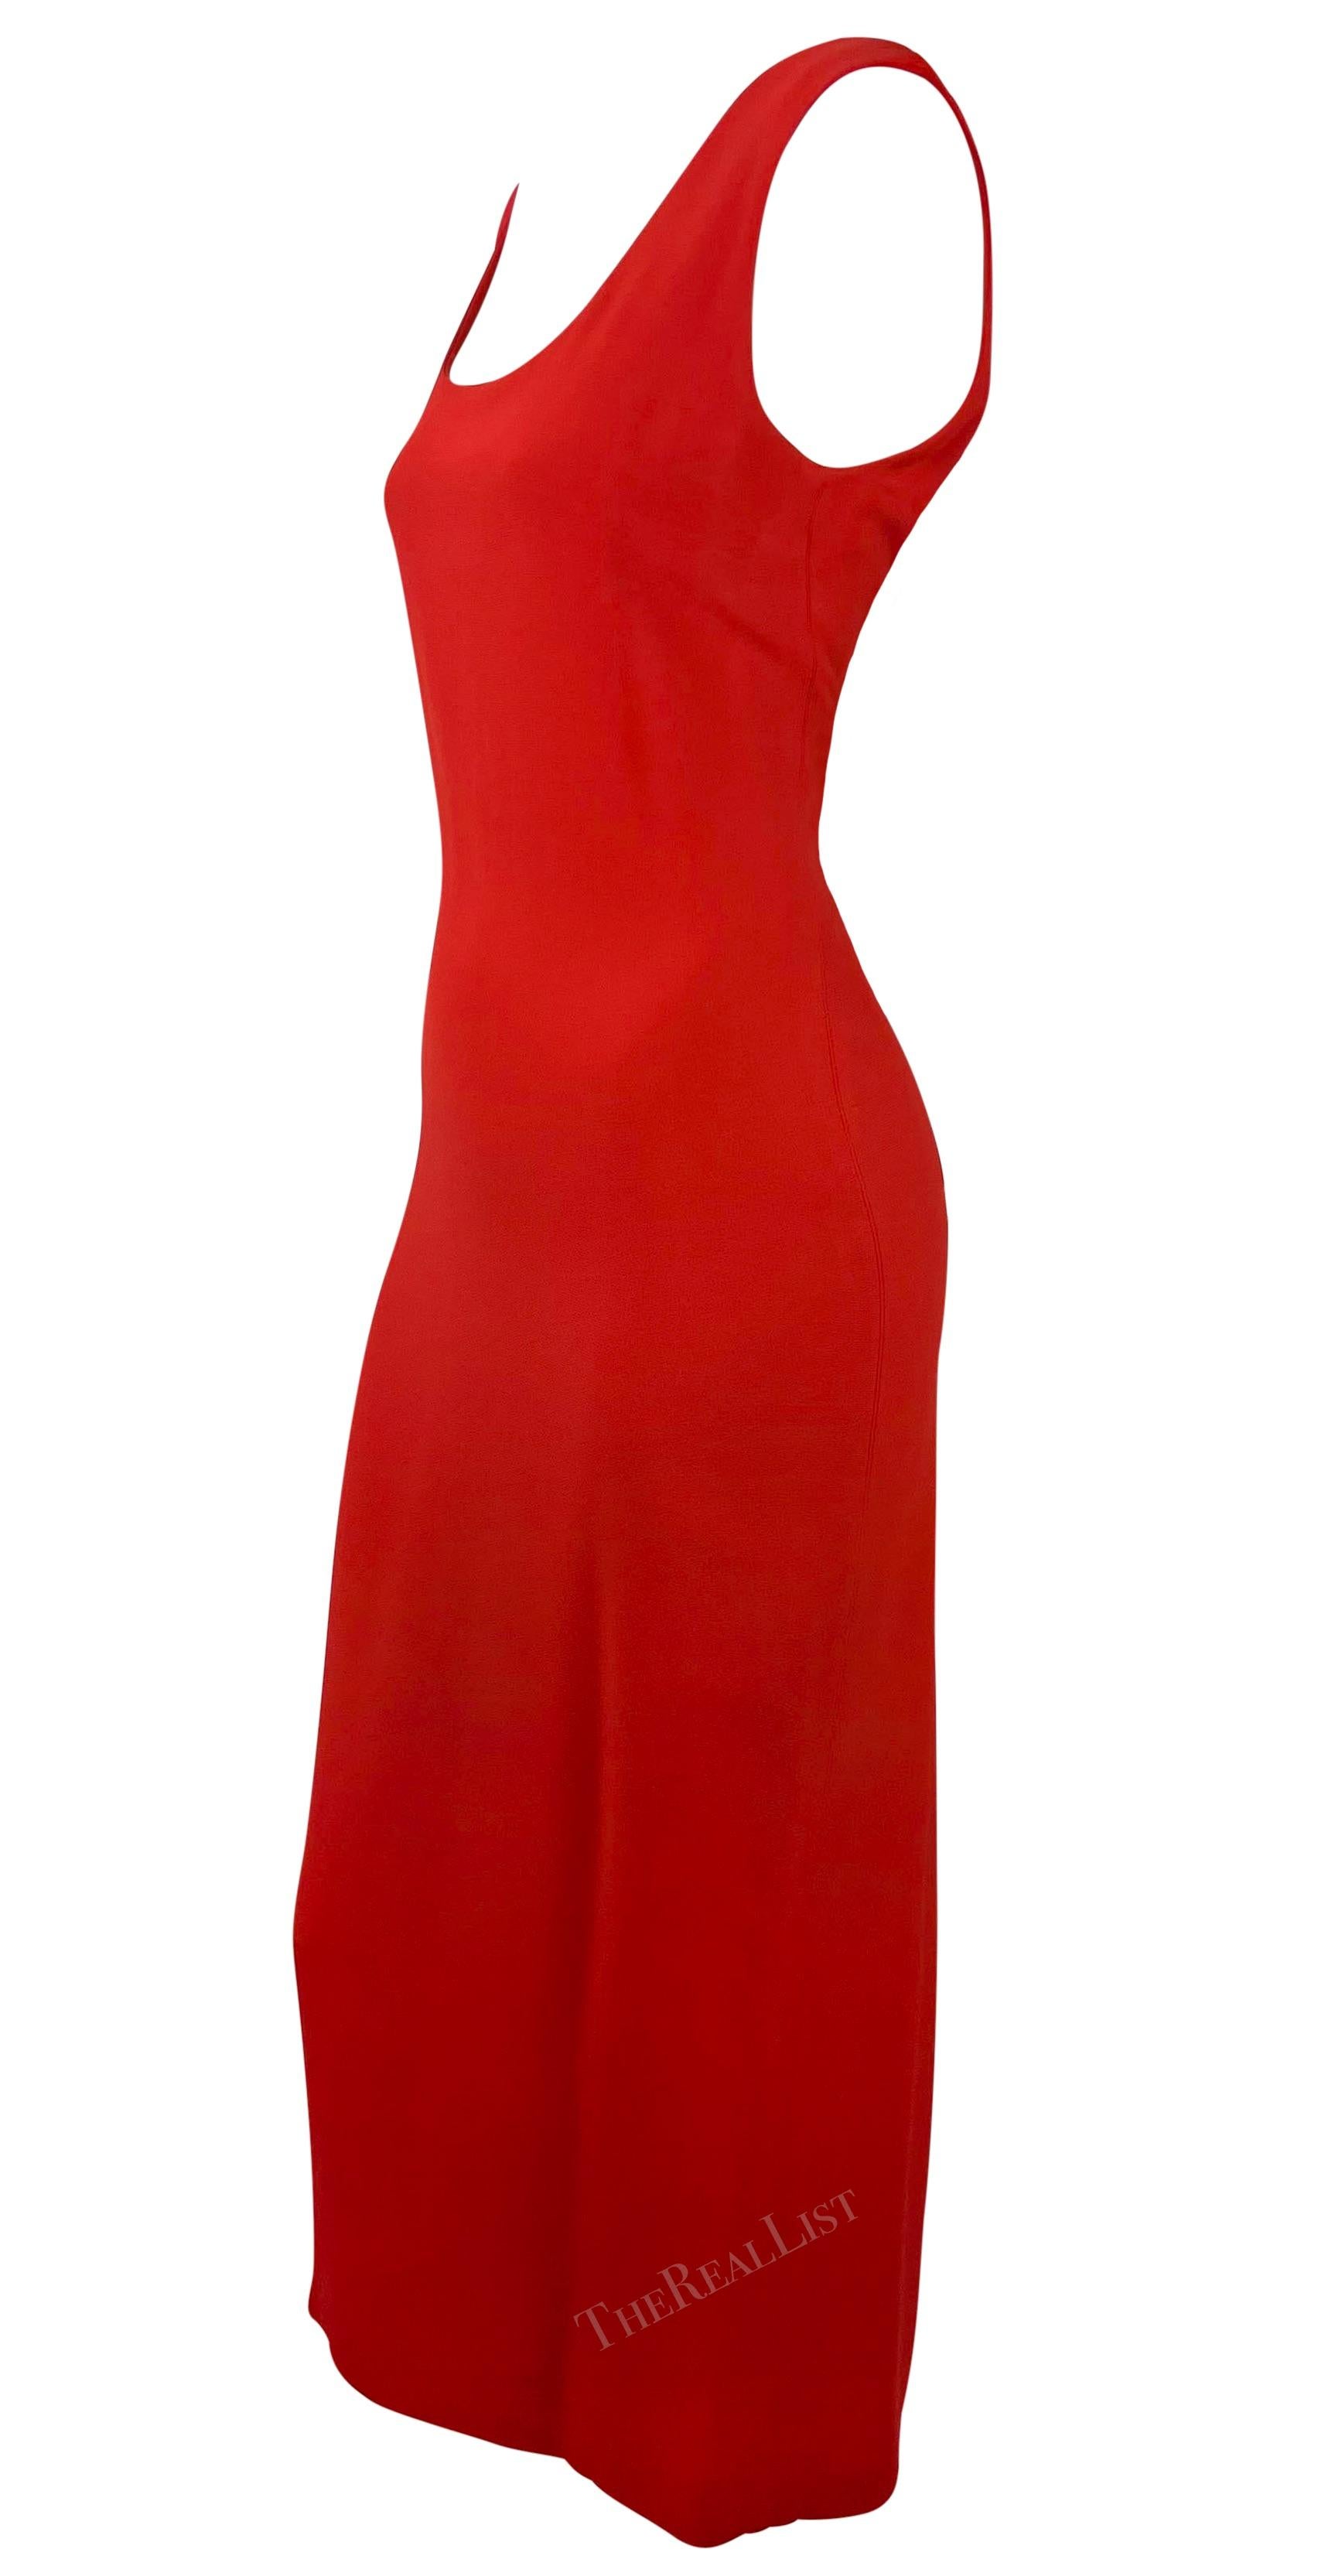 S/S 1993 Gianni Versace Runway Ad Red Plunging Back Sleeveless Dress For Sale 2